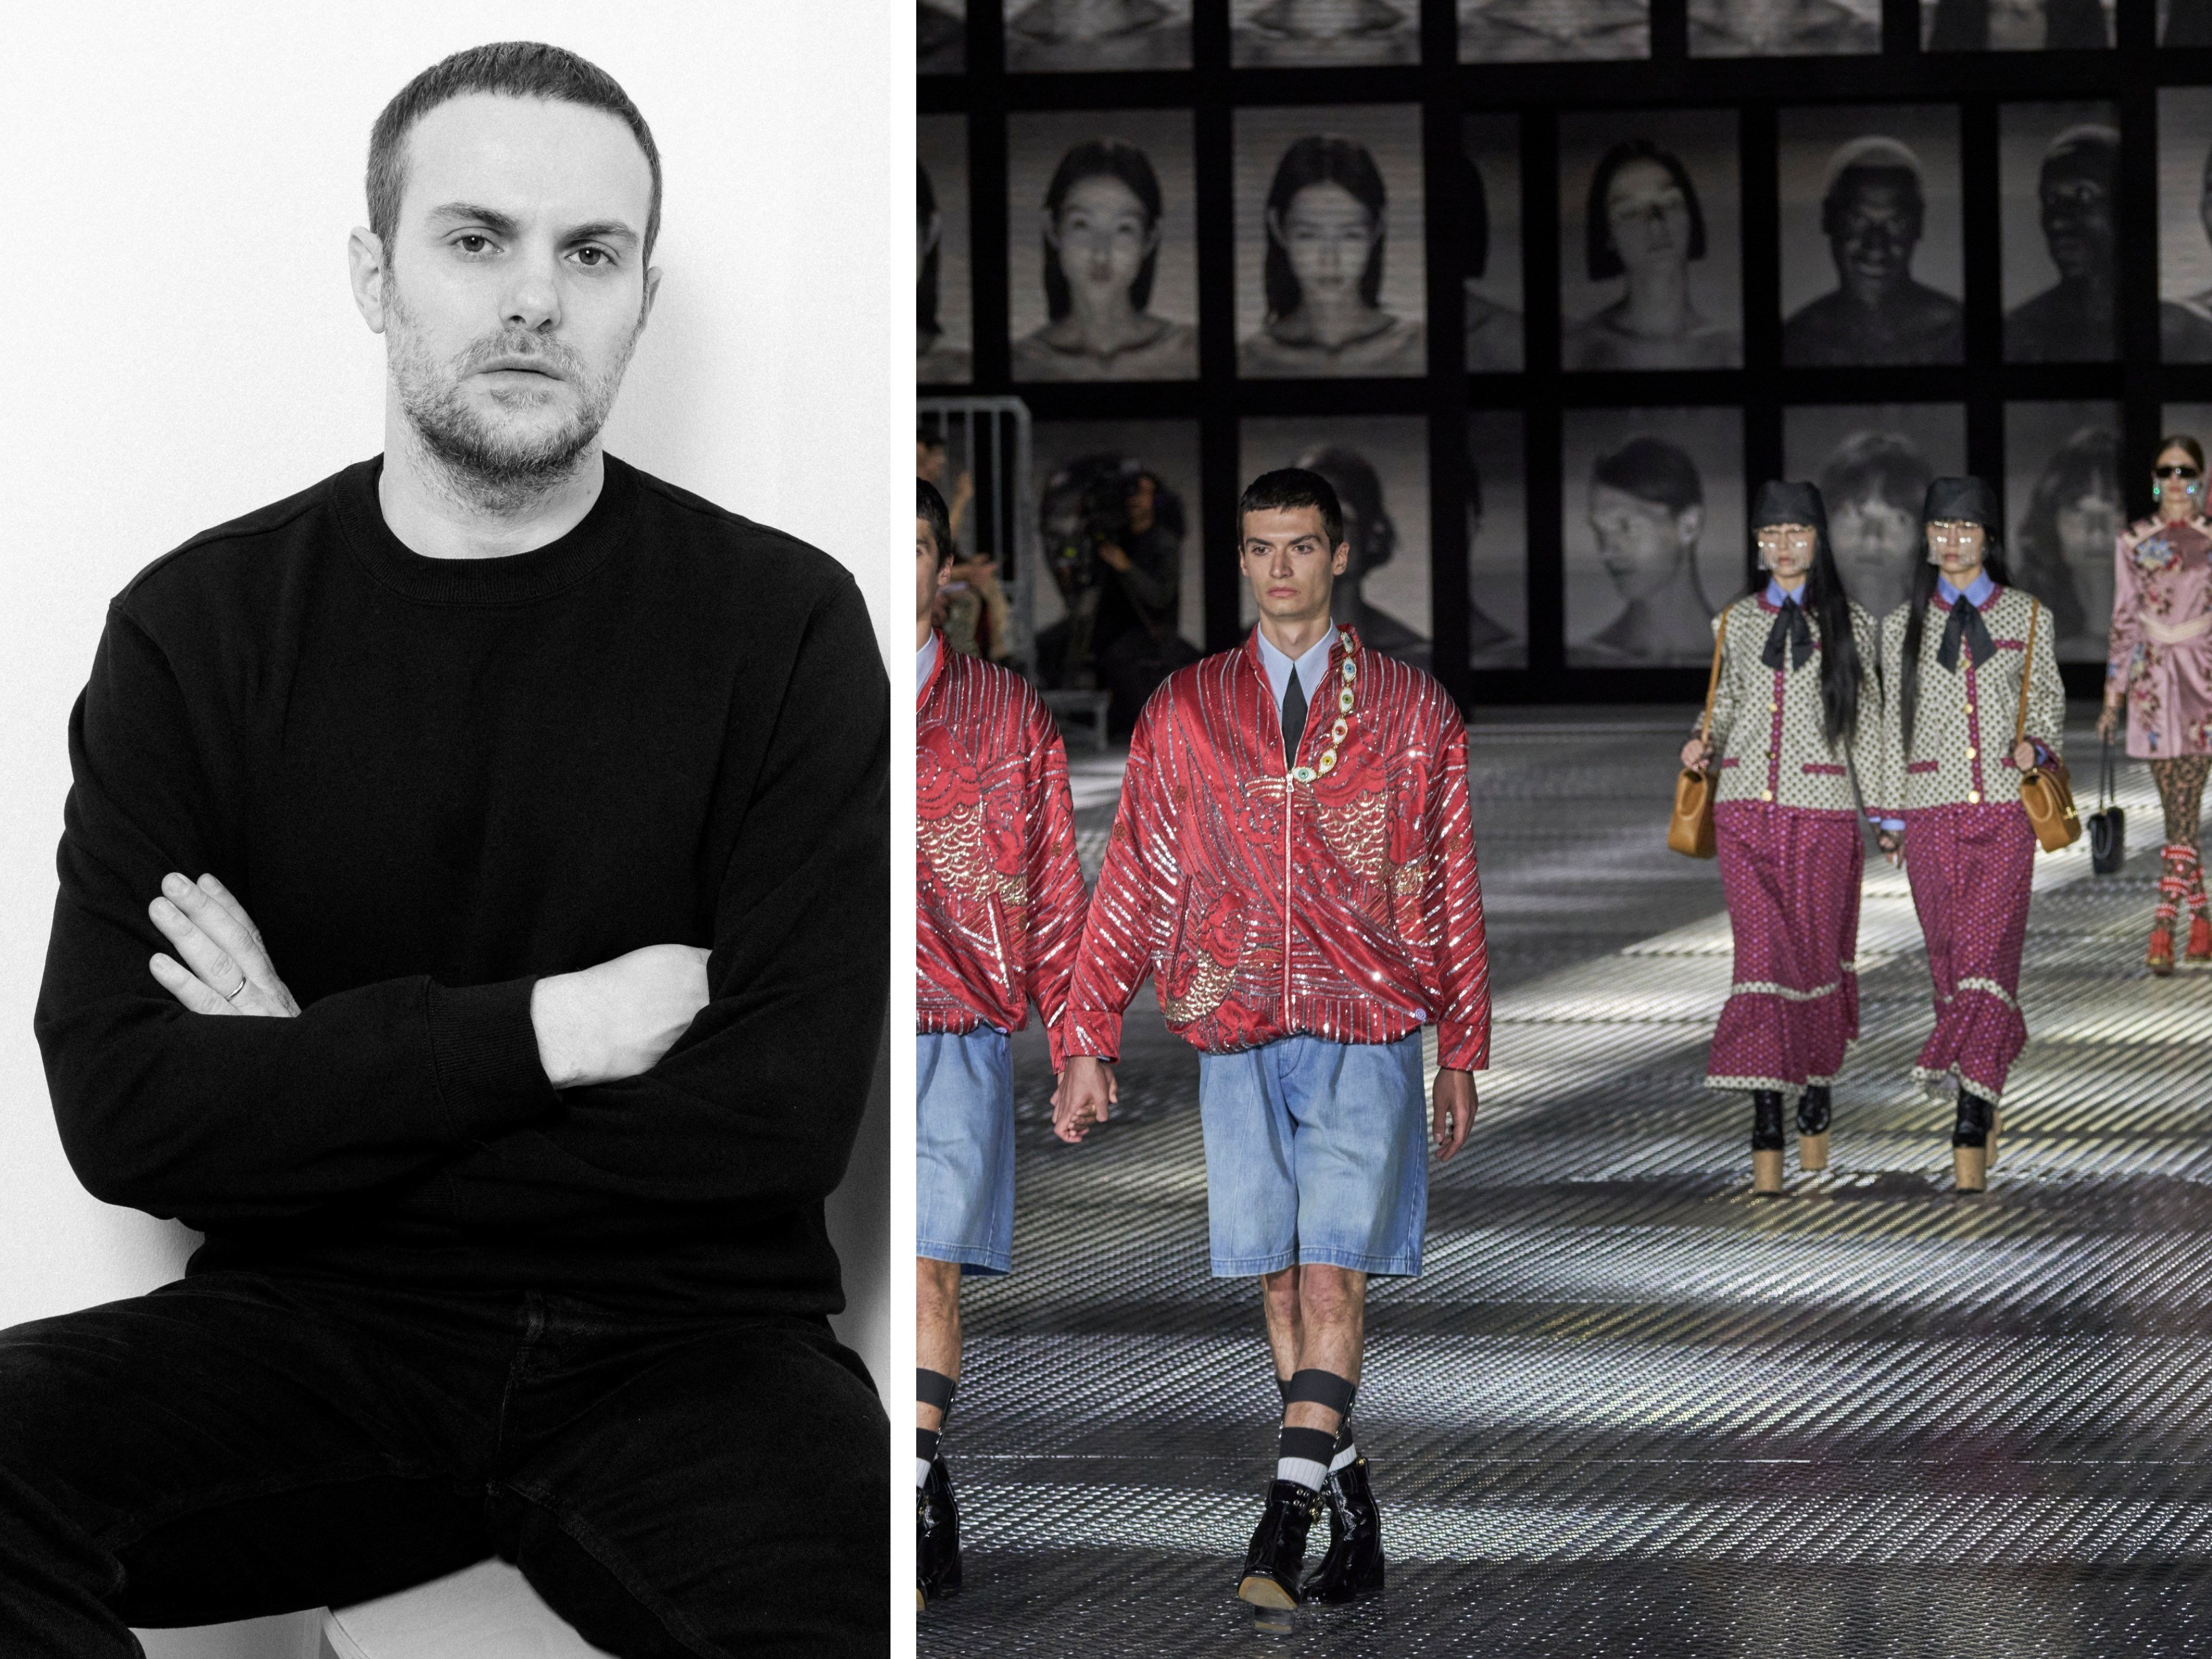 Gucci’s newly appointed creative director Sabato De Sarno used to work at Valentino. Photos: Reuters, Matteo Canestraro